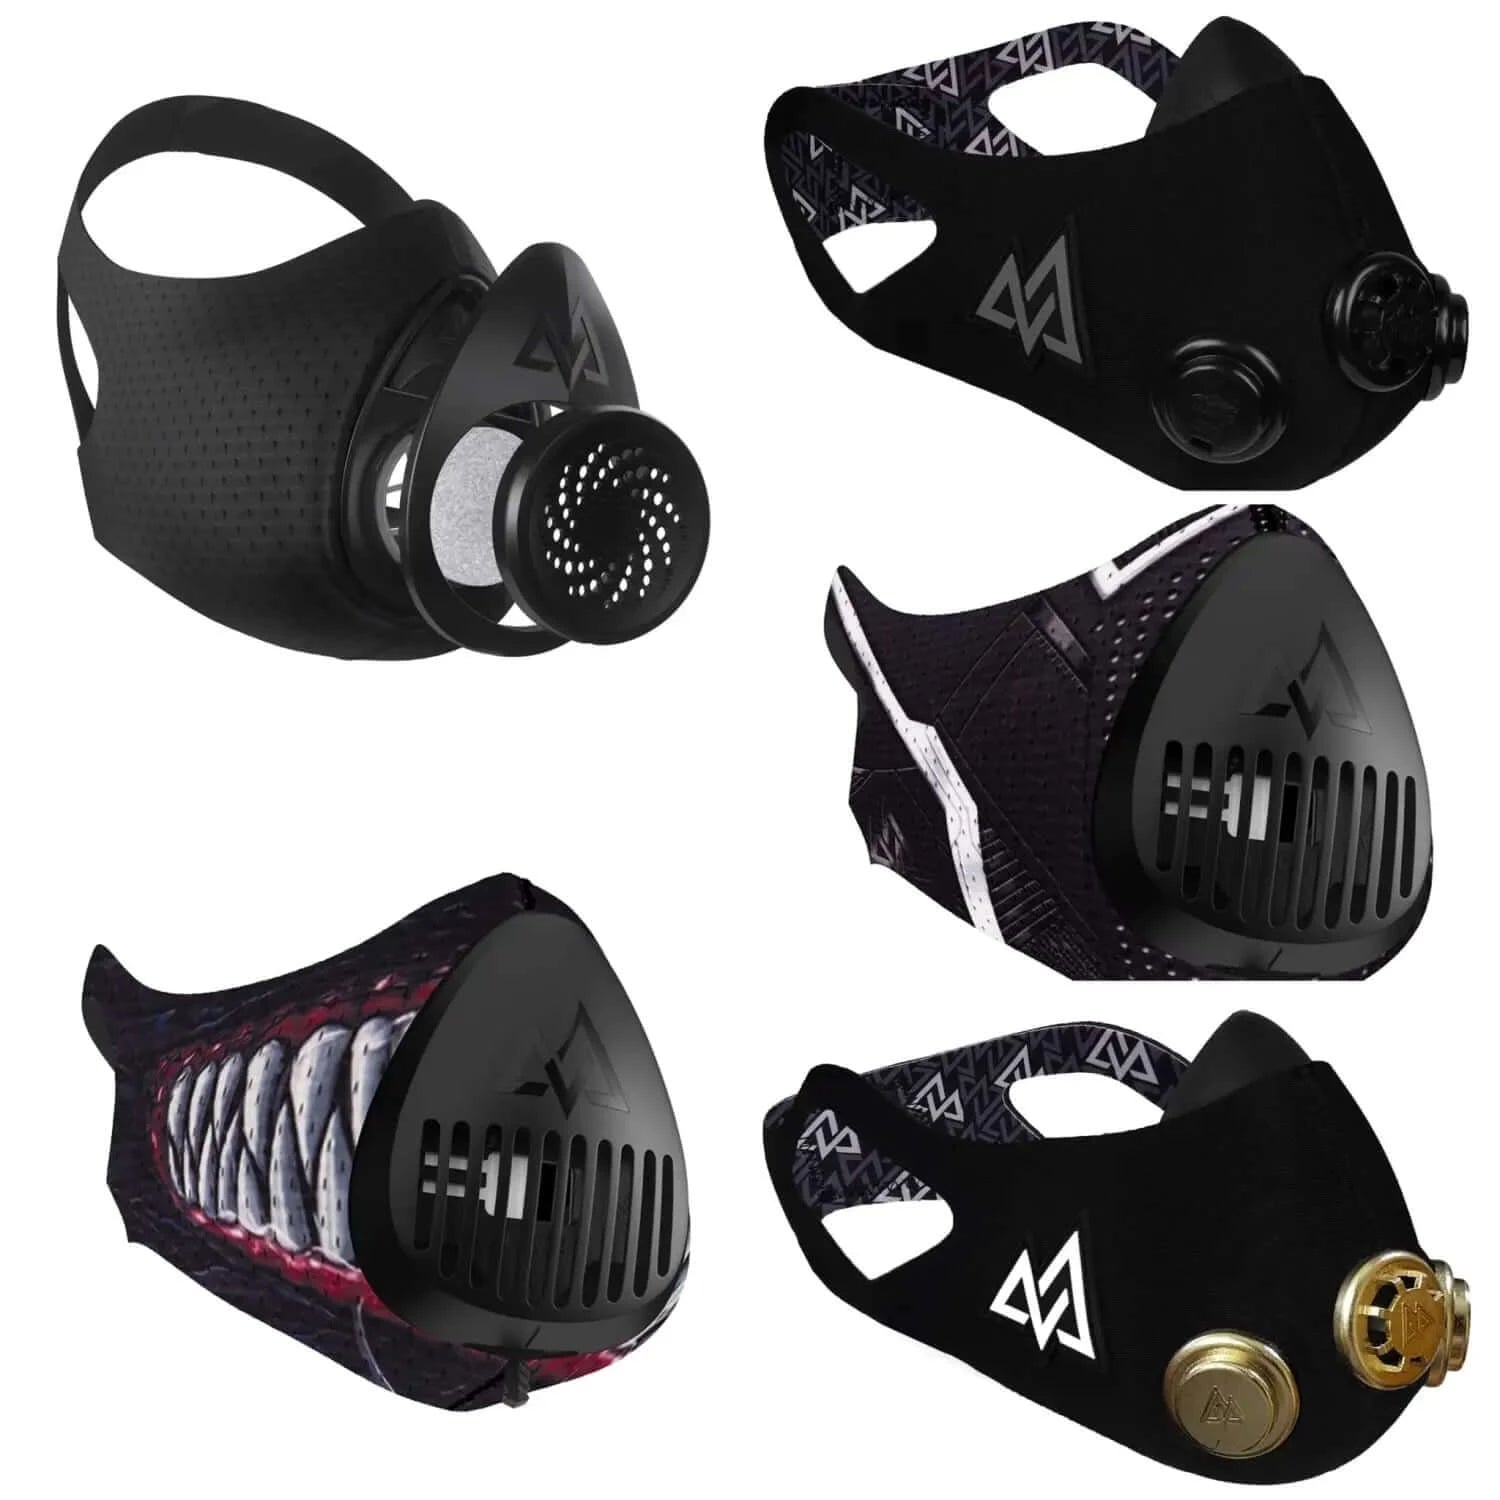 Elevation Training Mask - How to Use and Benefits